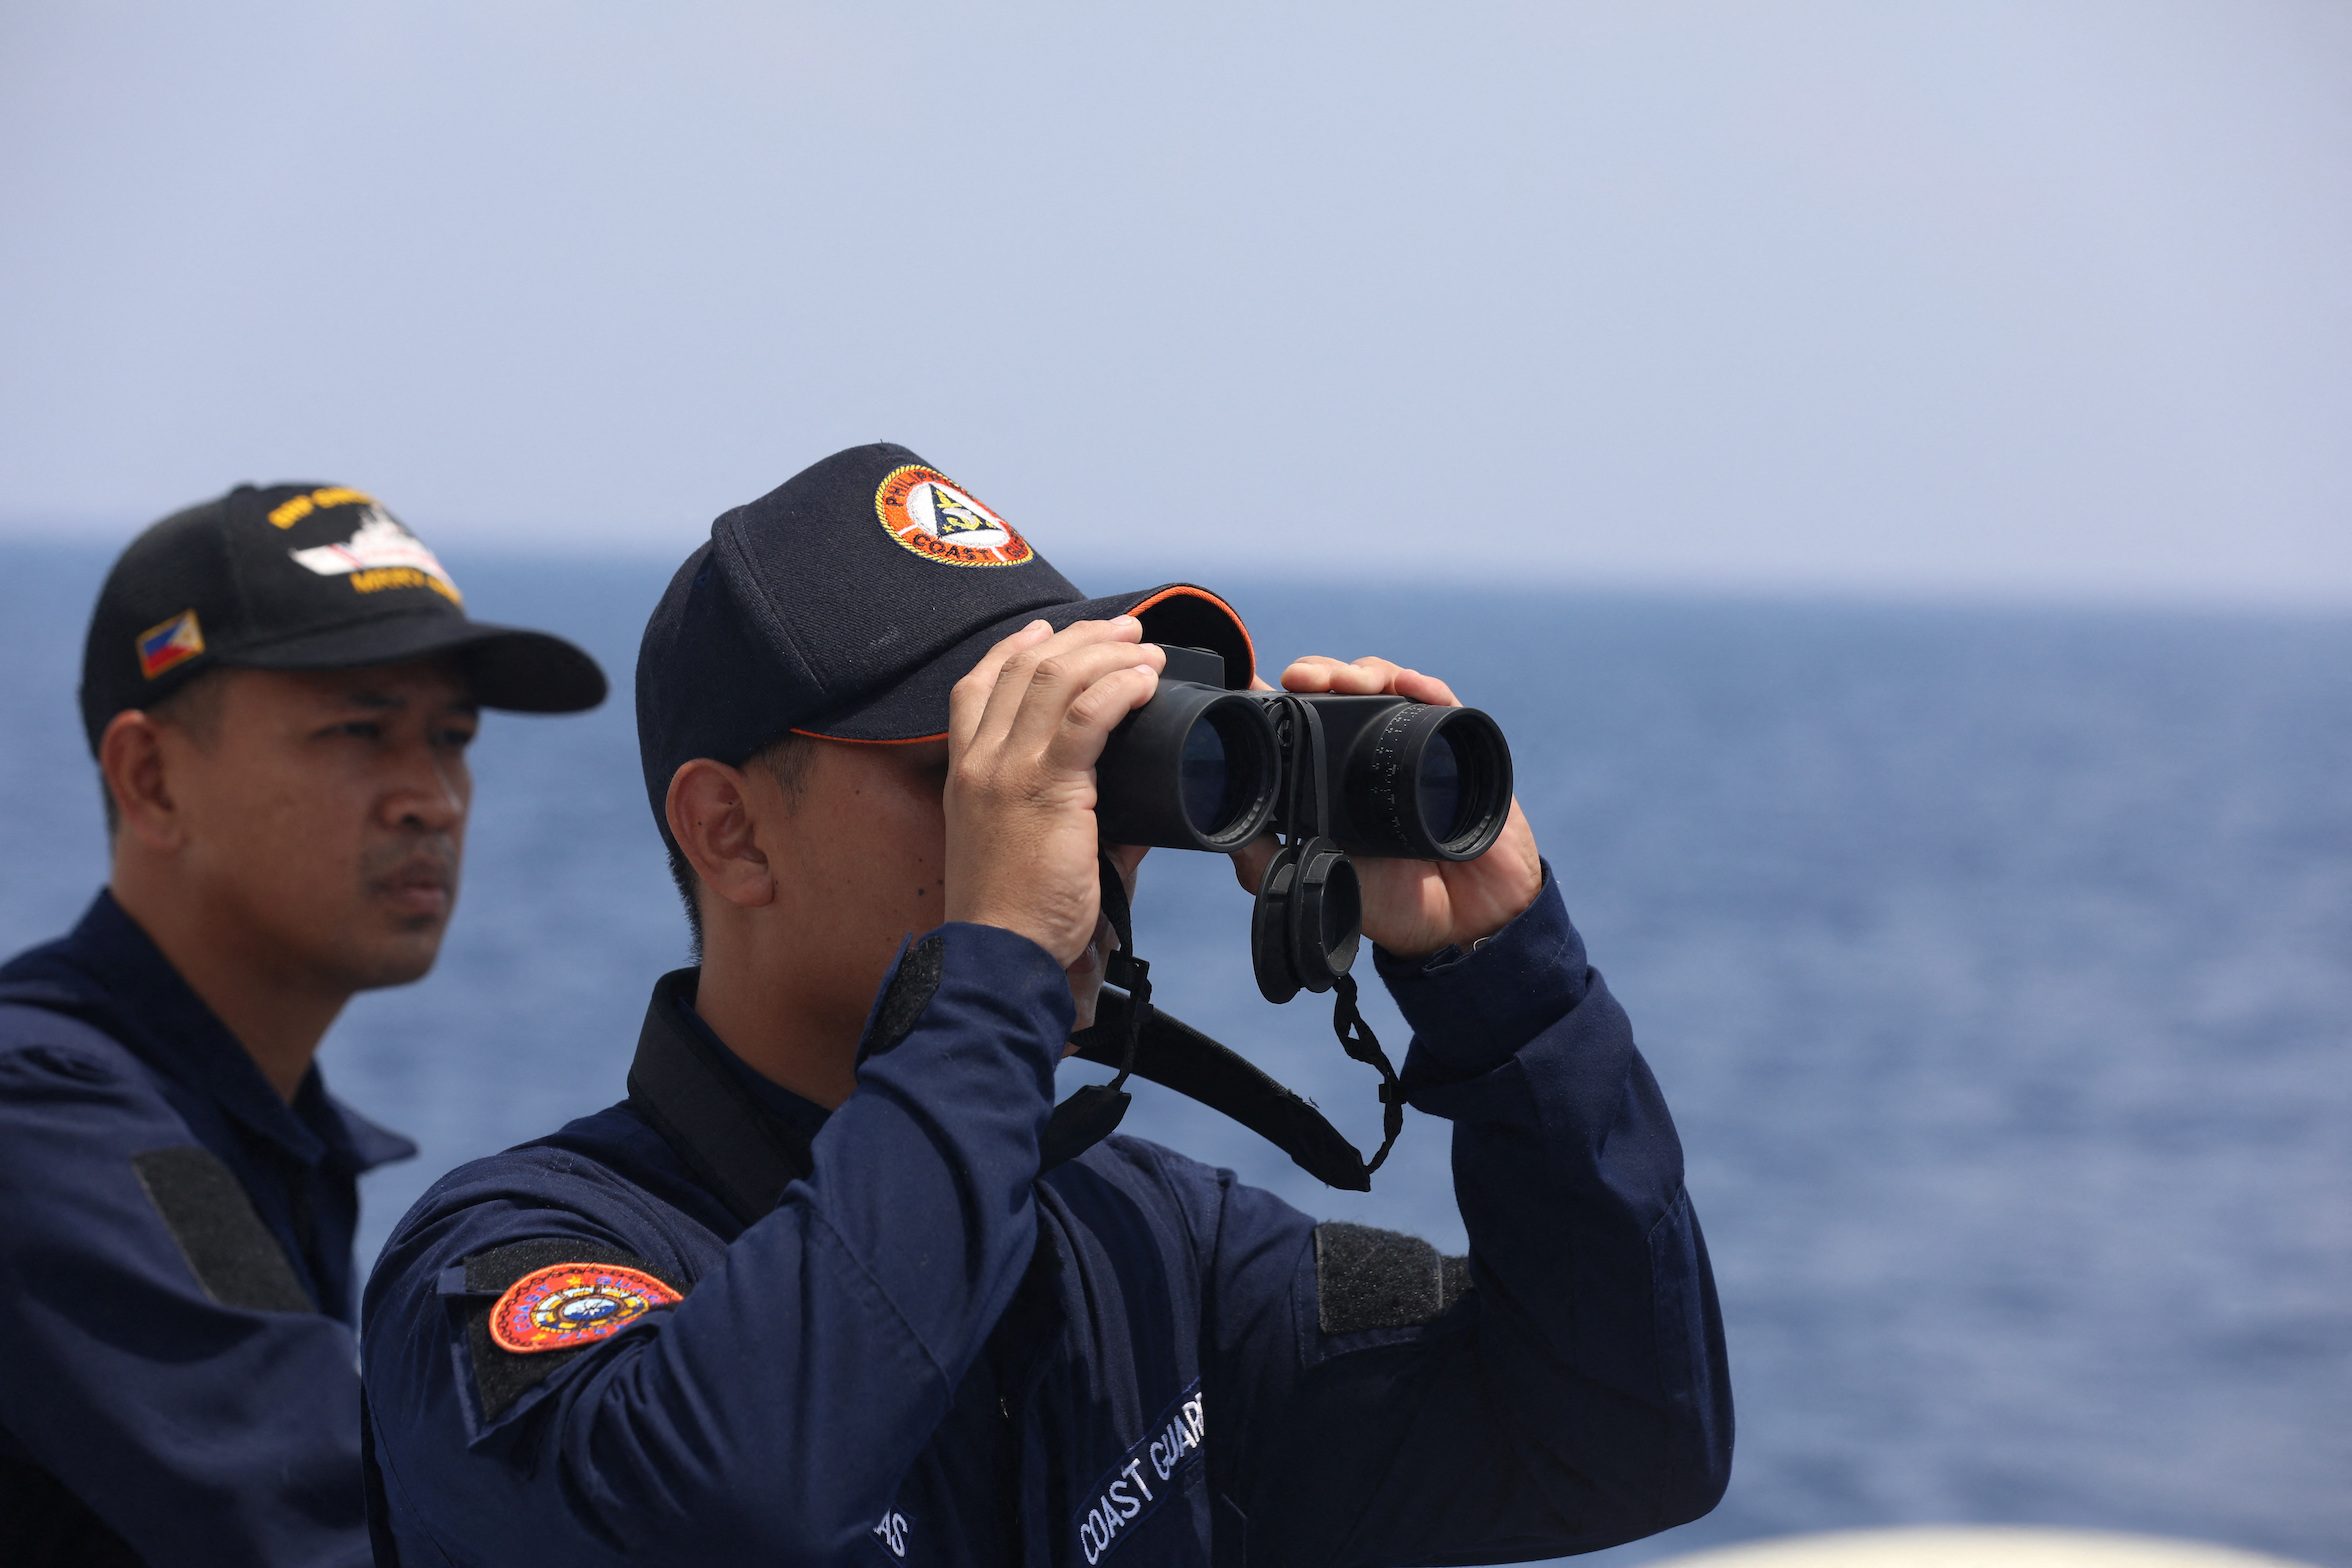 Near collision, tense encounter as Beijing flexes muscles in the South China Sea